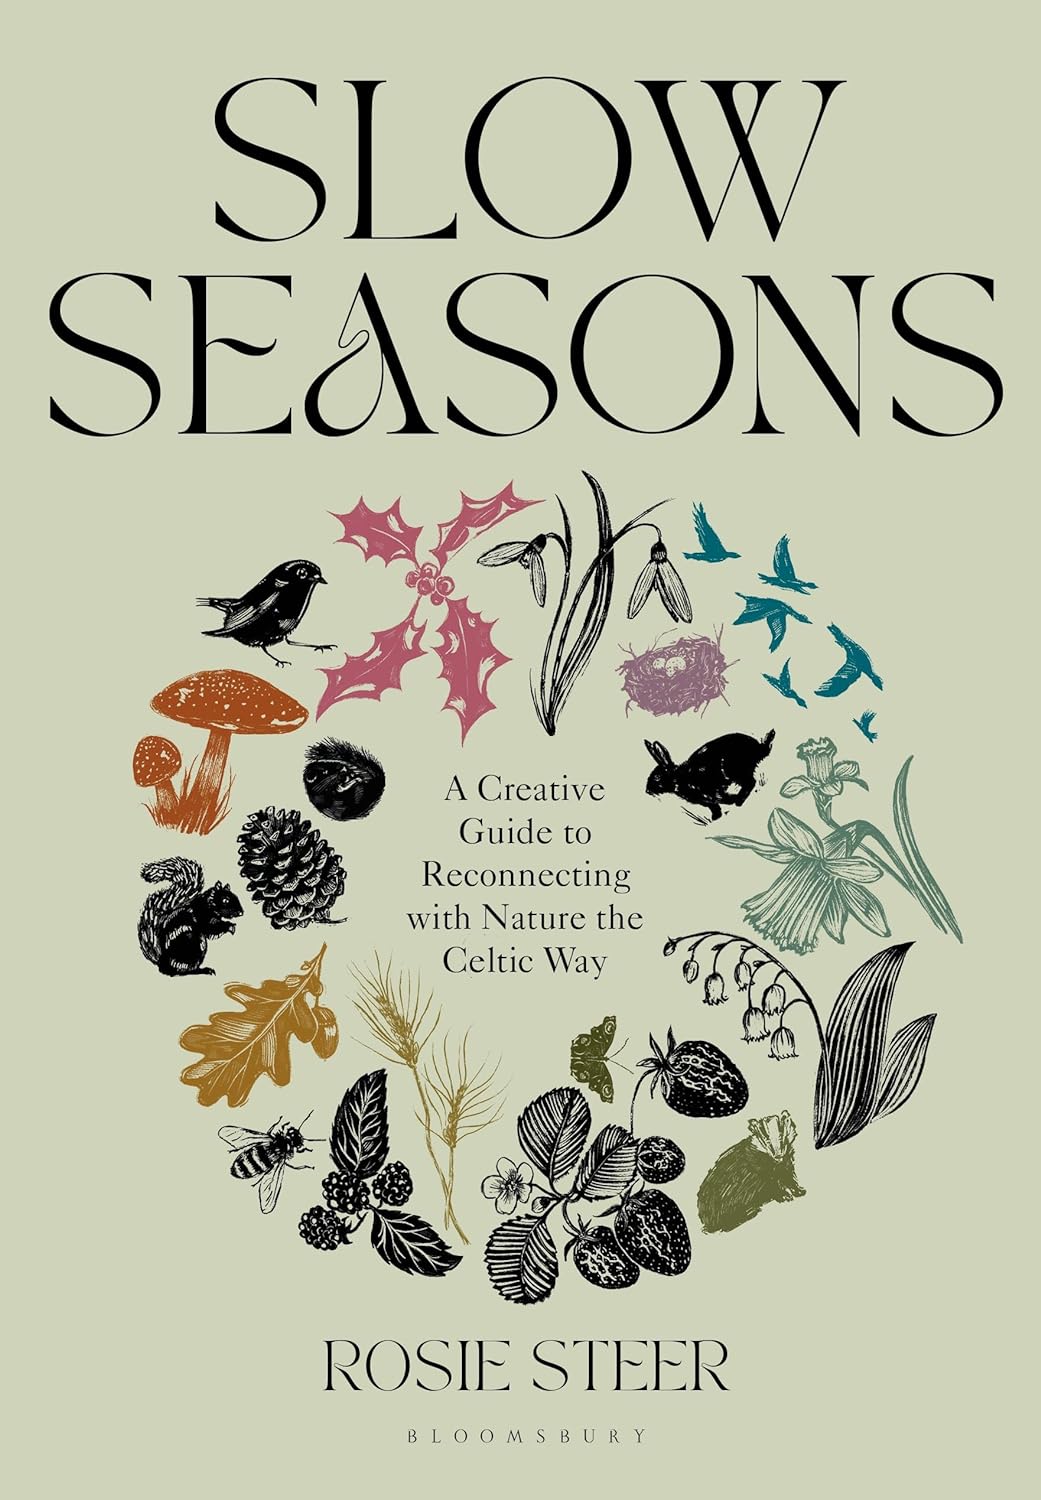 Slow Seasons: A Creative Guide to Reconnecting with Nature the Celtic Way [Rosie Steer]